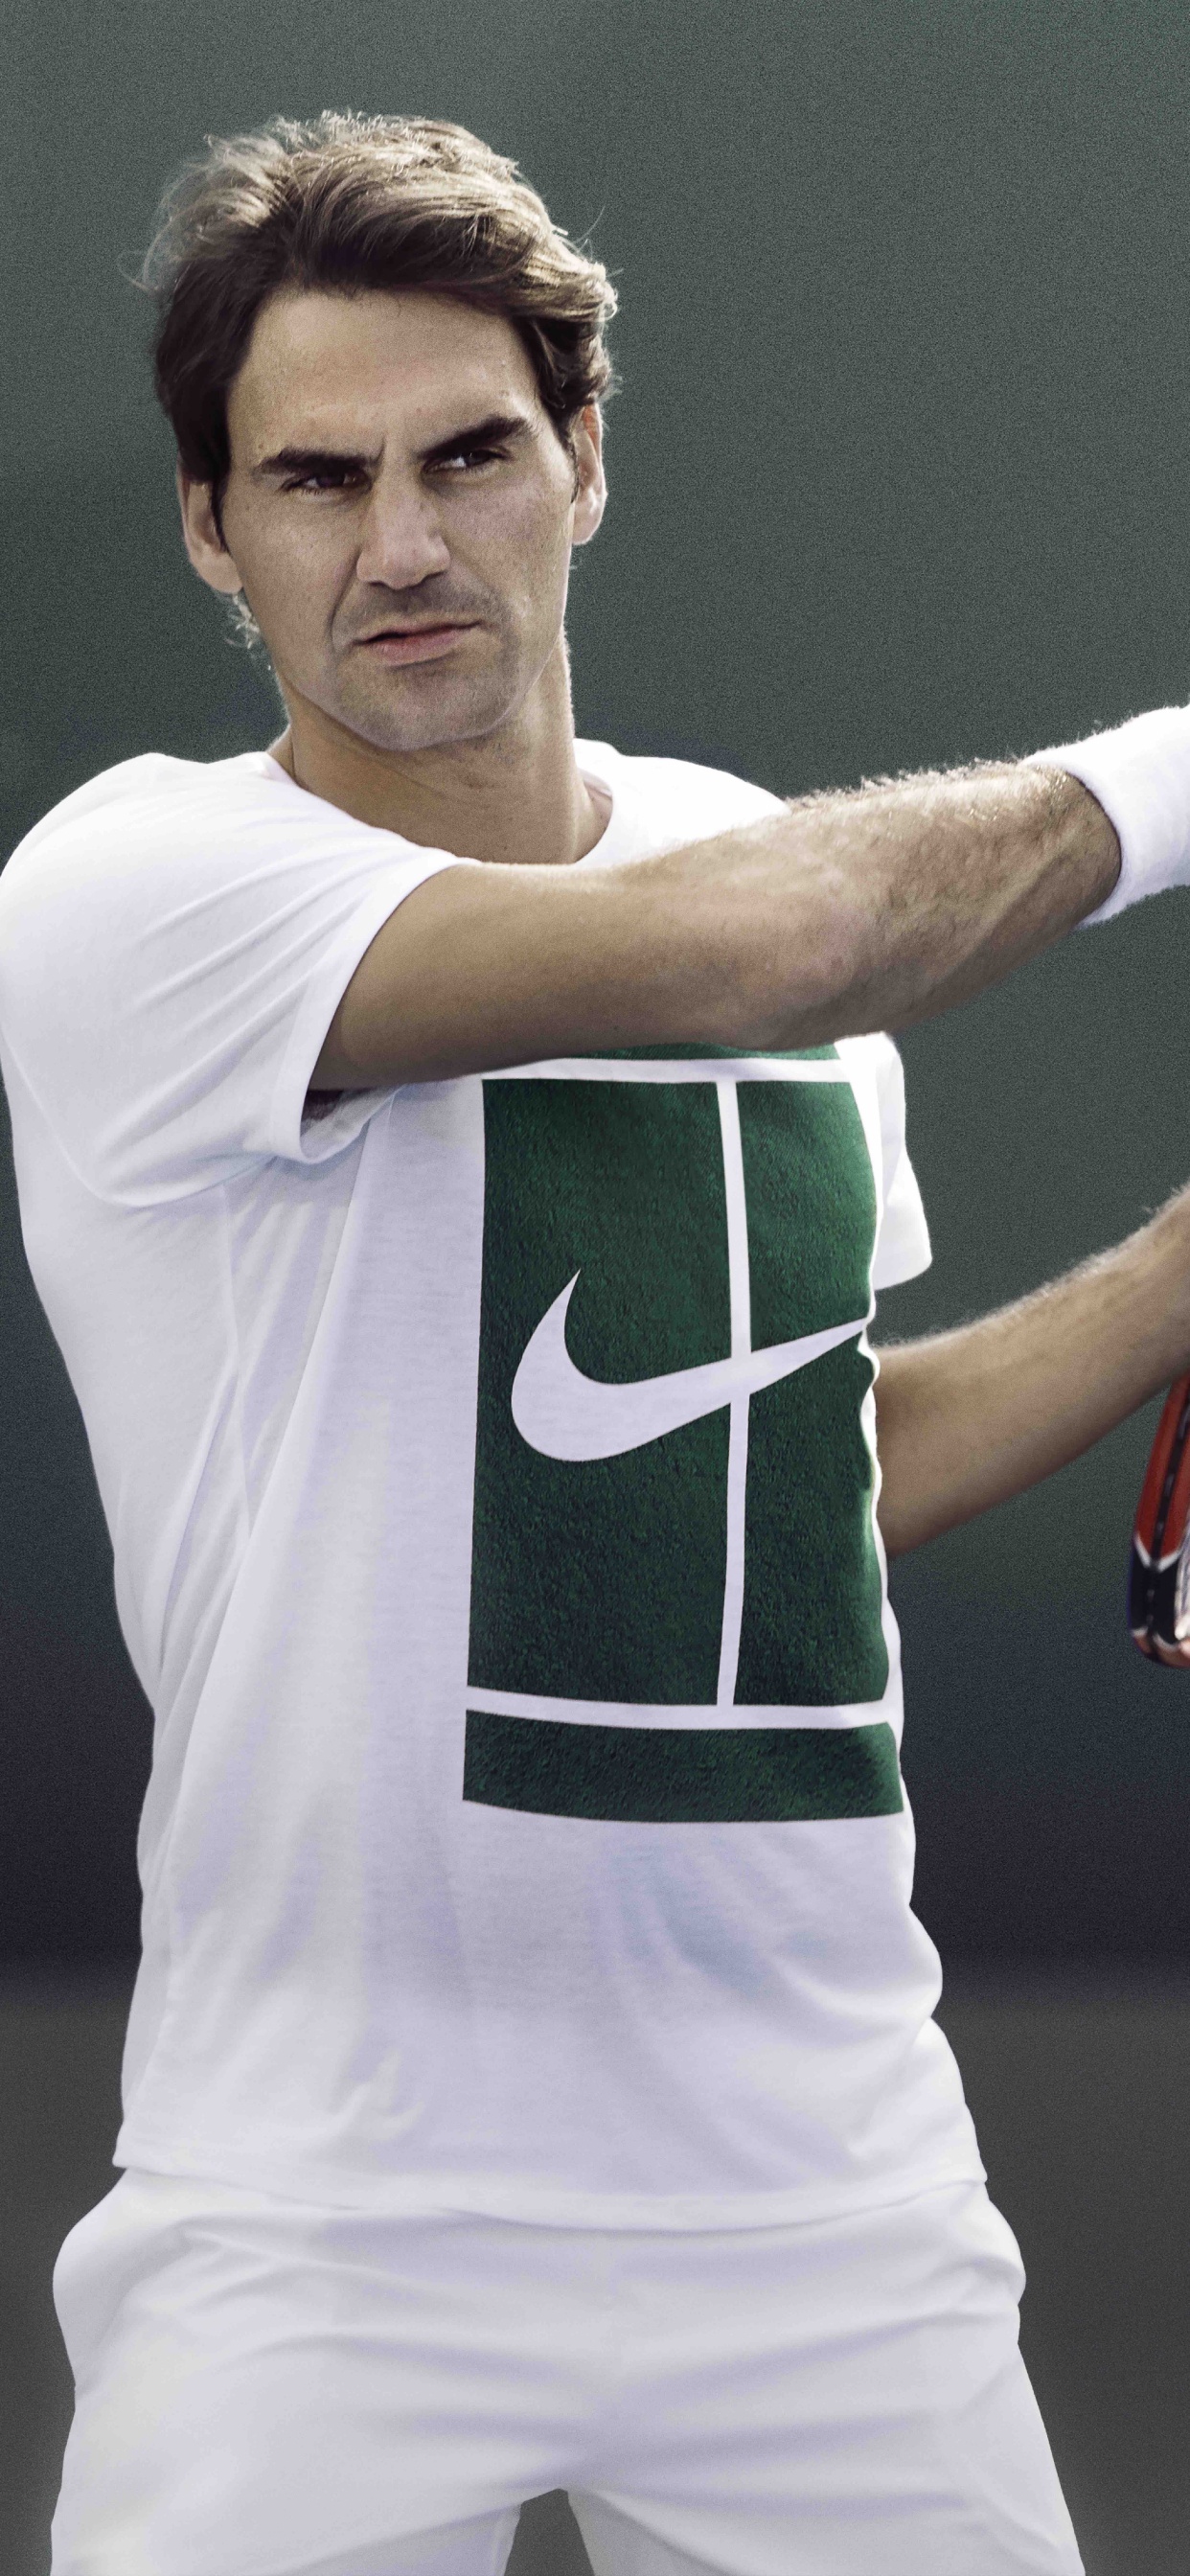 Man in Green and White Nike Jersey Shirt Holding Red and White Tennis Racket. Wallpaper in 1242x2688 Resolution